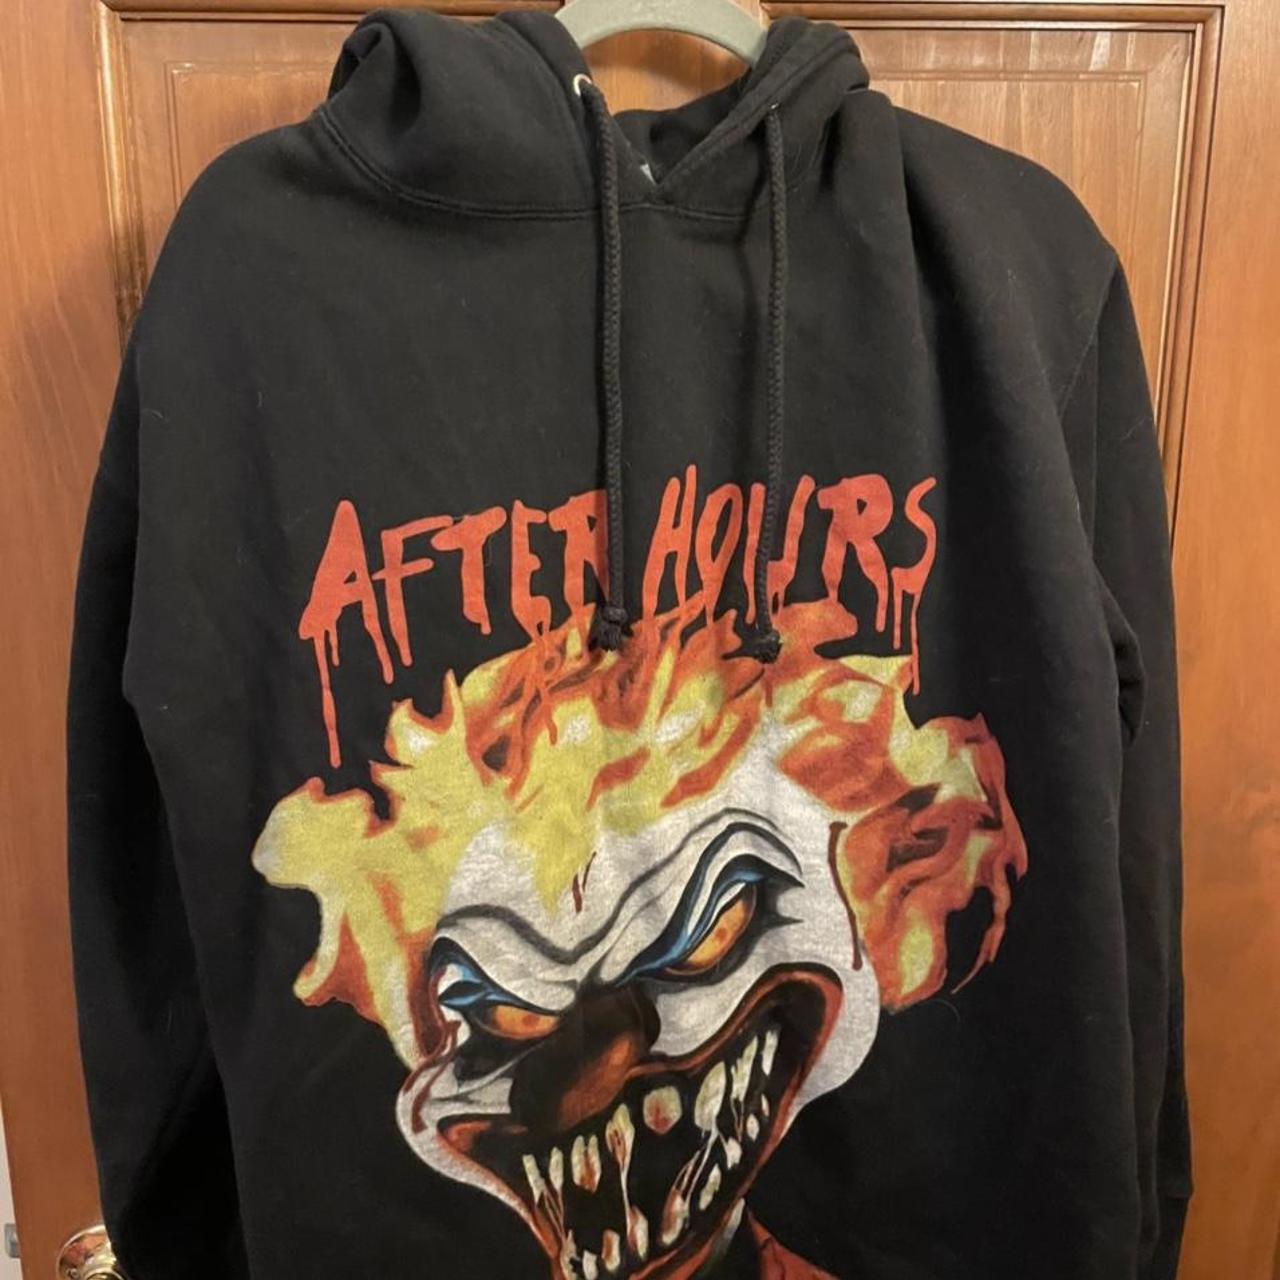 The Weeknd x Vlone What Happens After Hours Pullover Hood White Men's -  SS20 - US